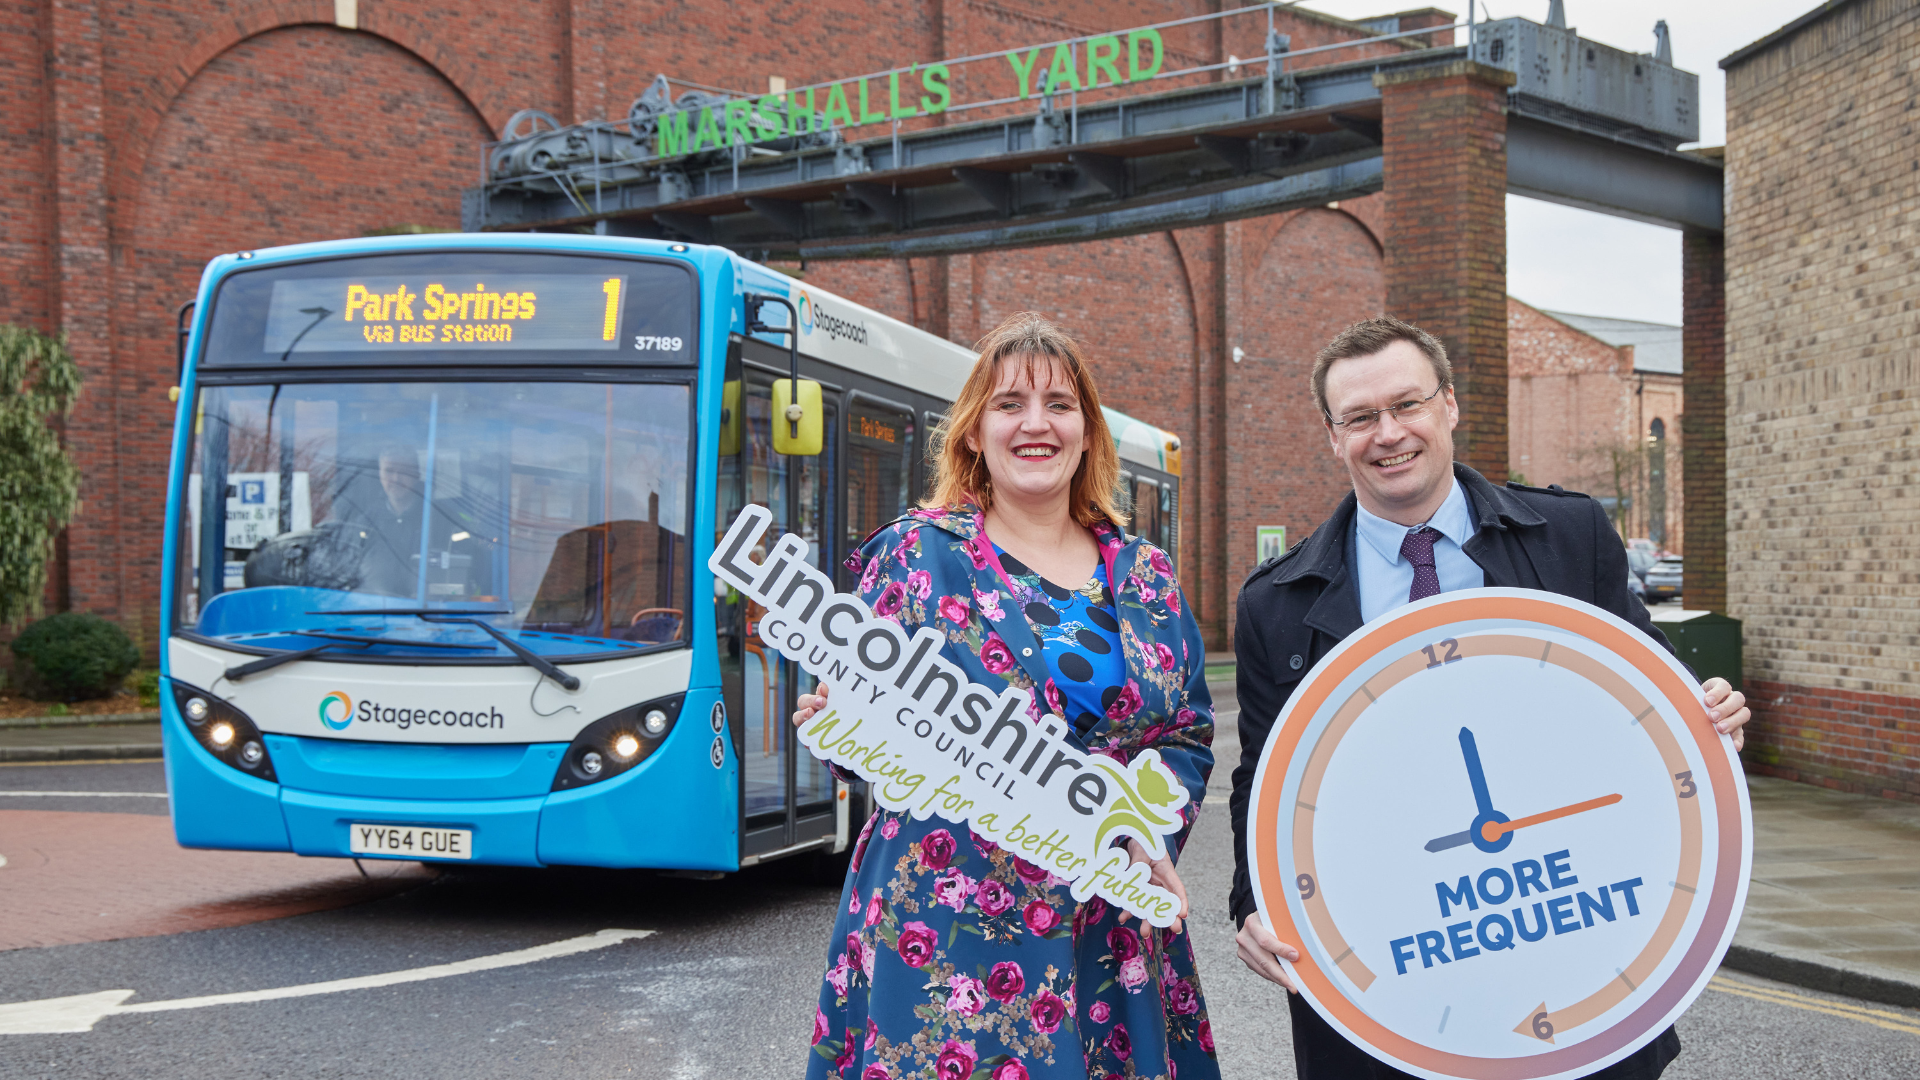 Cllr Clio Perraton-Williams and Matt Cranwell, Managing Director of Stagecoach East Midlands, pictured in front of one of the Gainsborough buses.